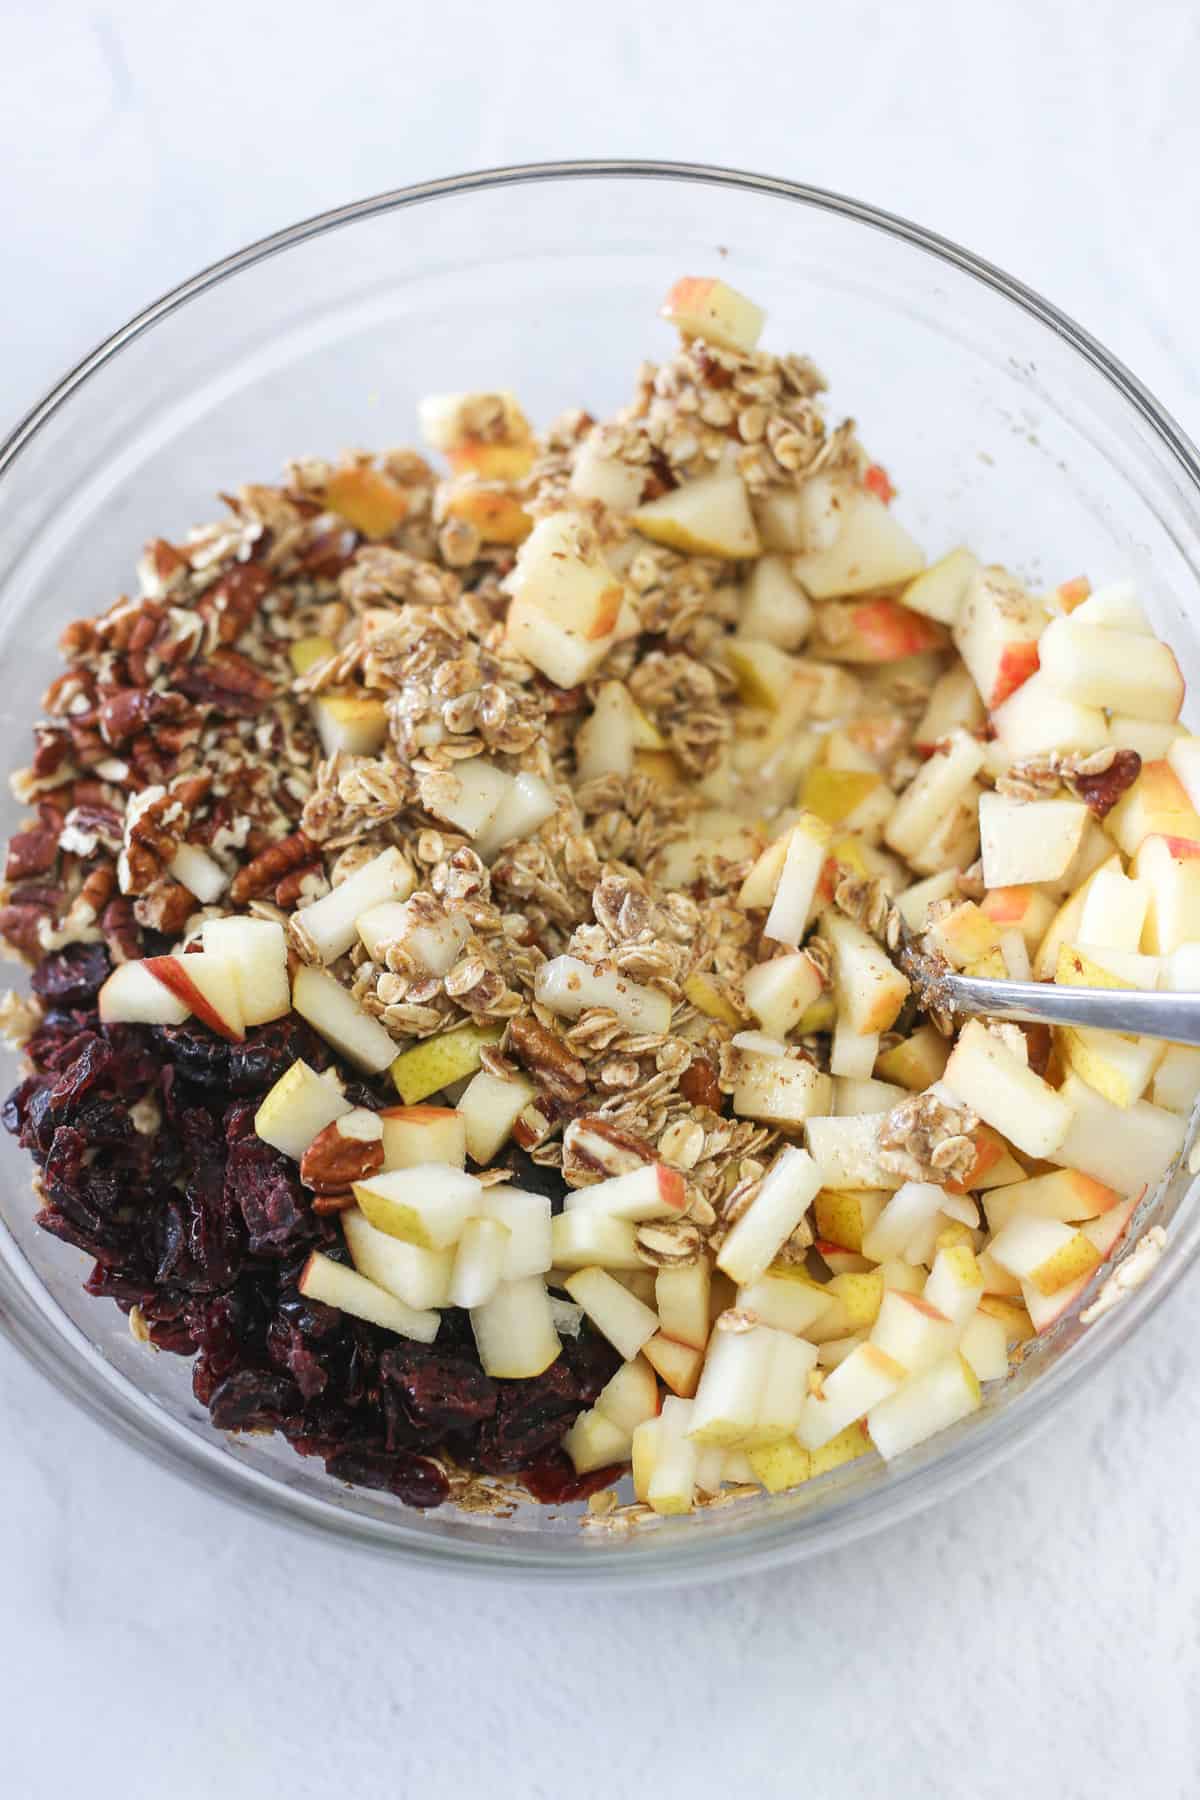 Mixing fruit into the baked oatmeal mixture.